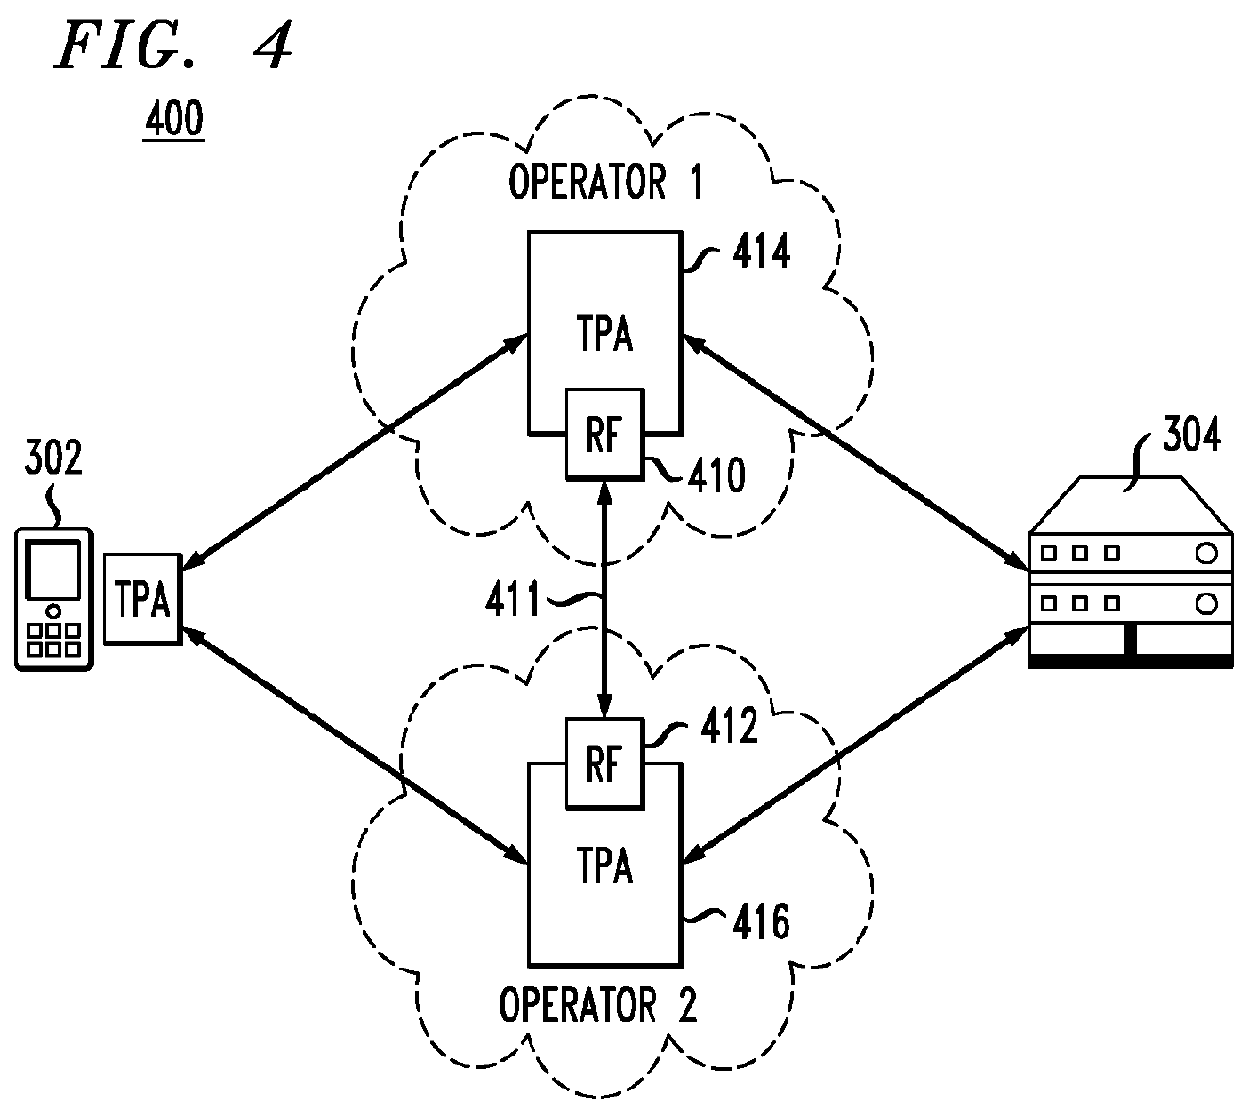 Transparent proxy architecture for multi-path data connections